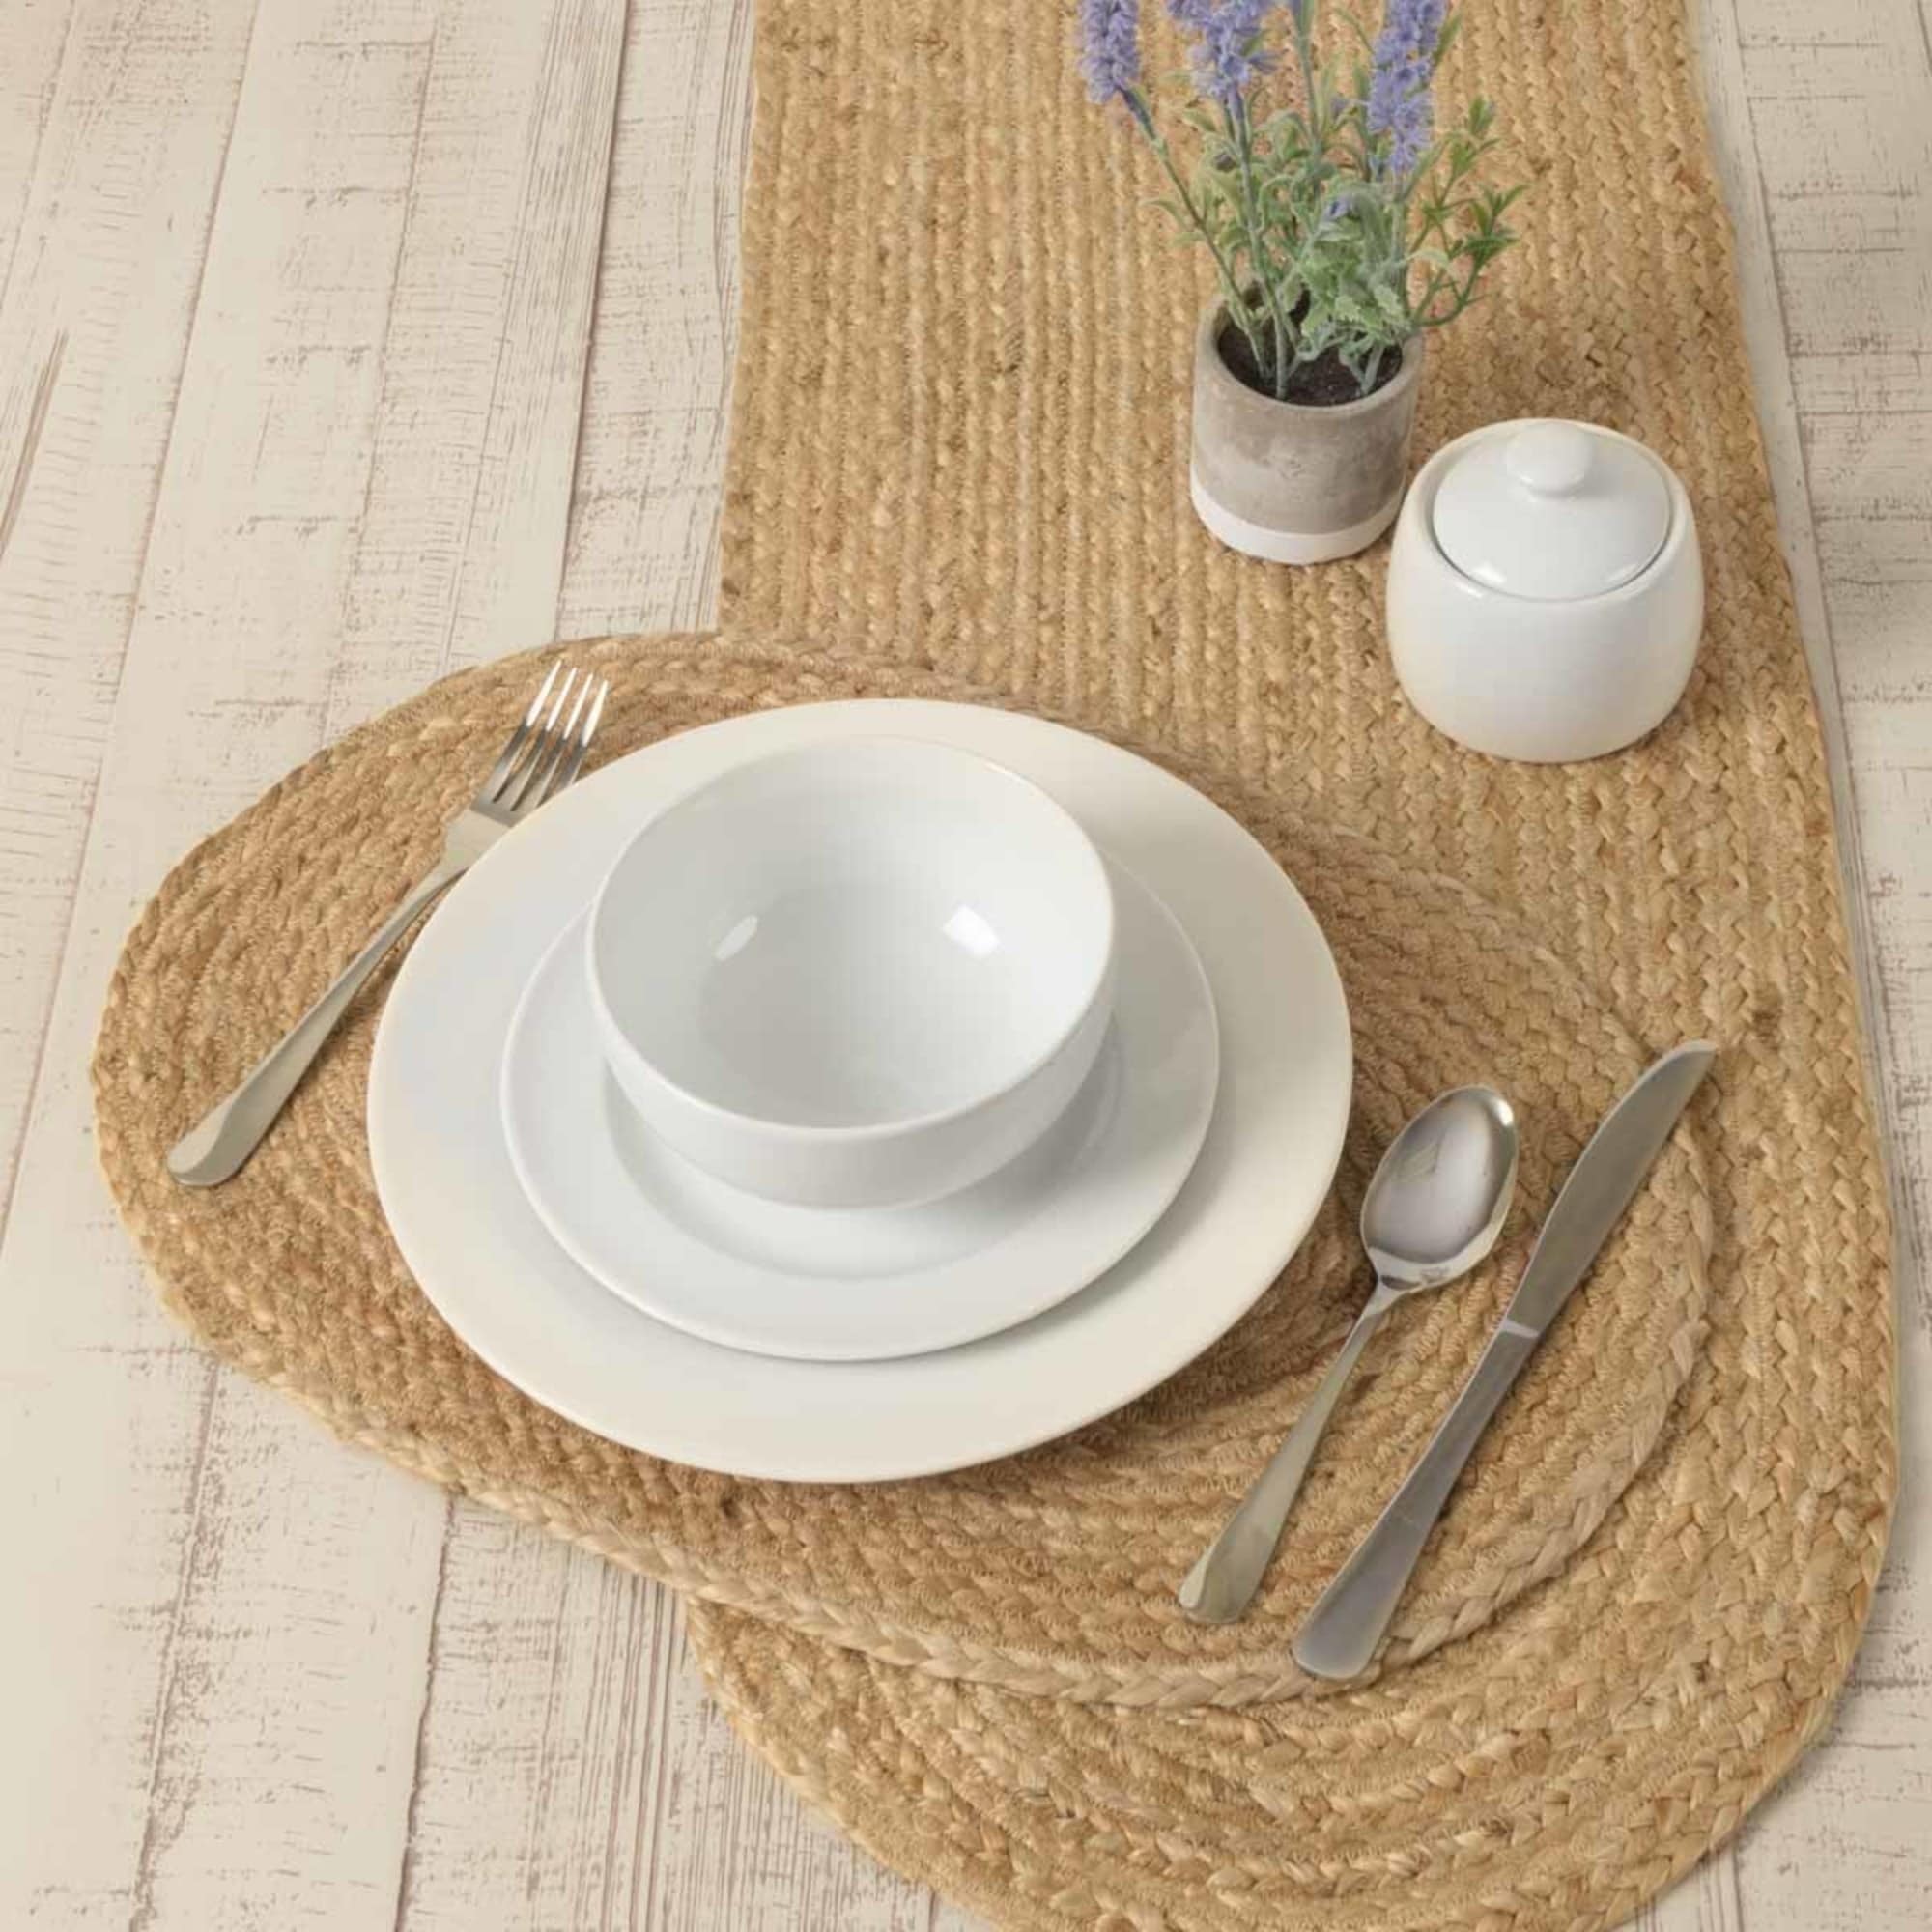 Jucos Burlap Placemats 12X18 Inch Set of 4 for Rustic Jute Natural Colur Vintage